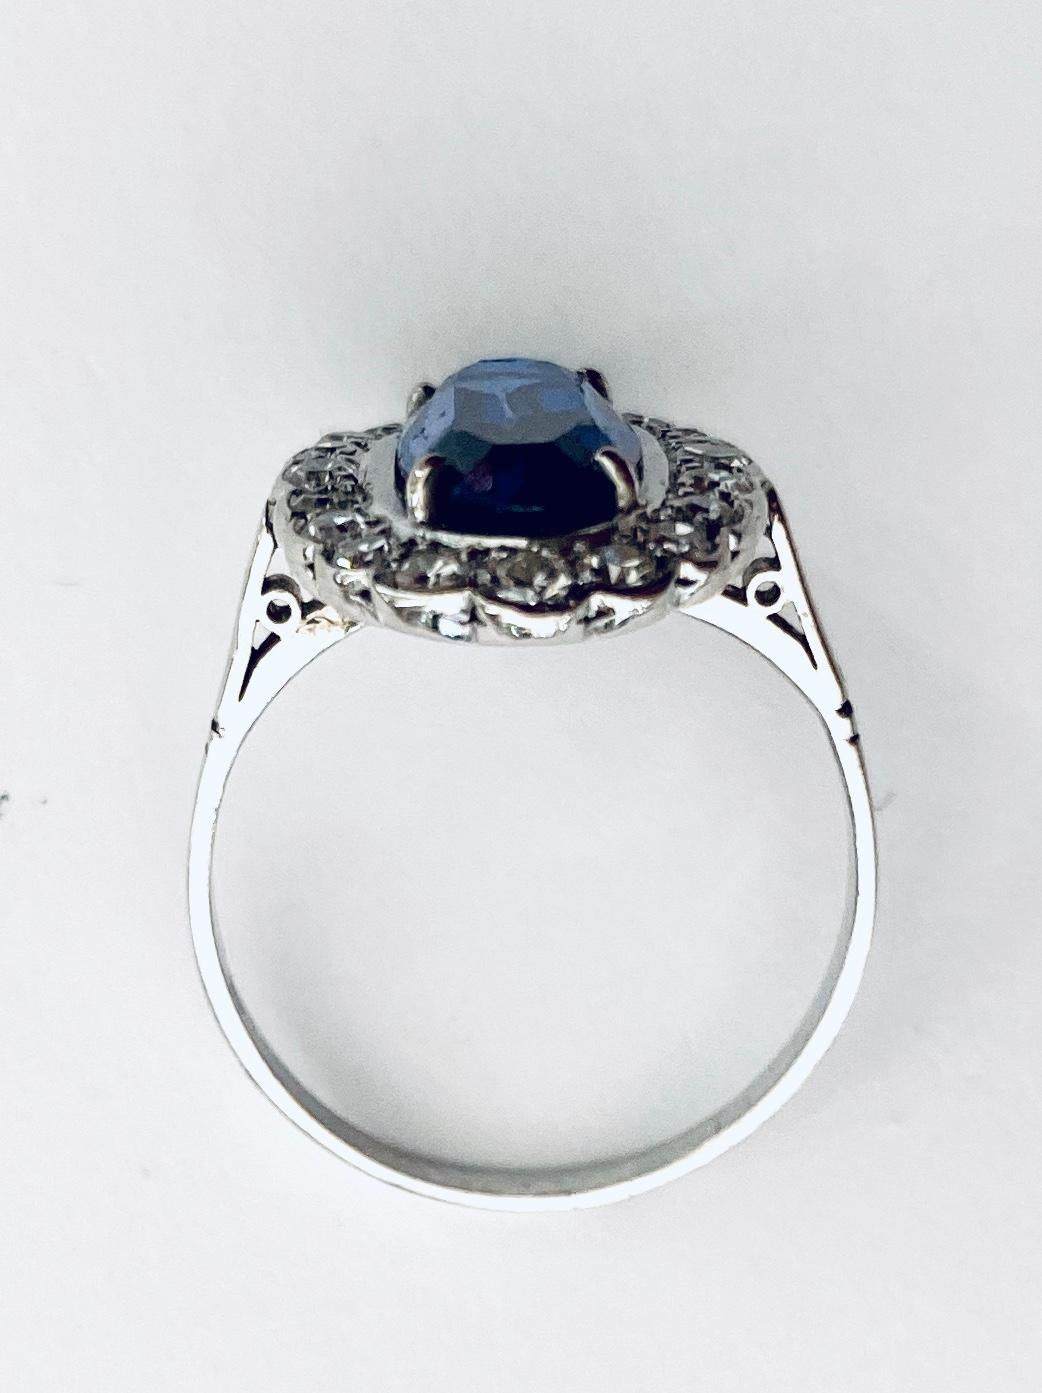 Art Deco Platinum Ring Set with 20 Diamonds and 1 Synthetic Sapphire, France, 1925 For Sale